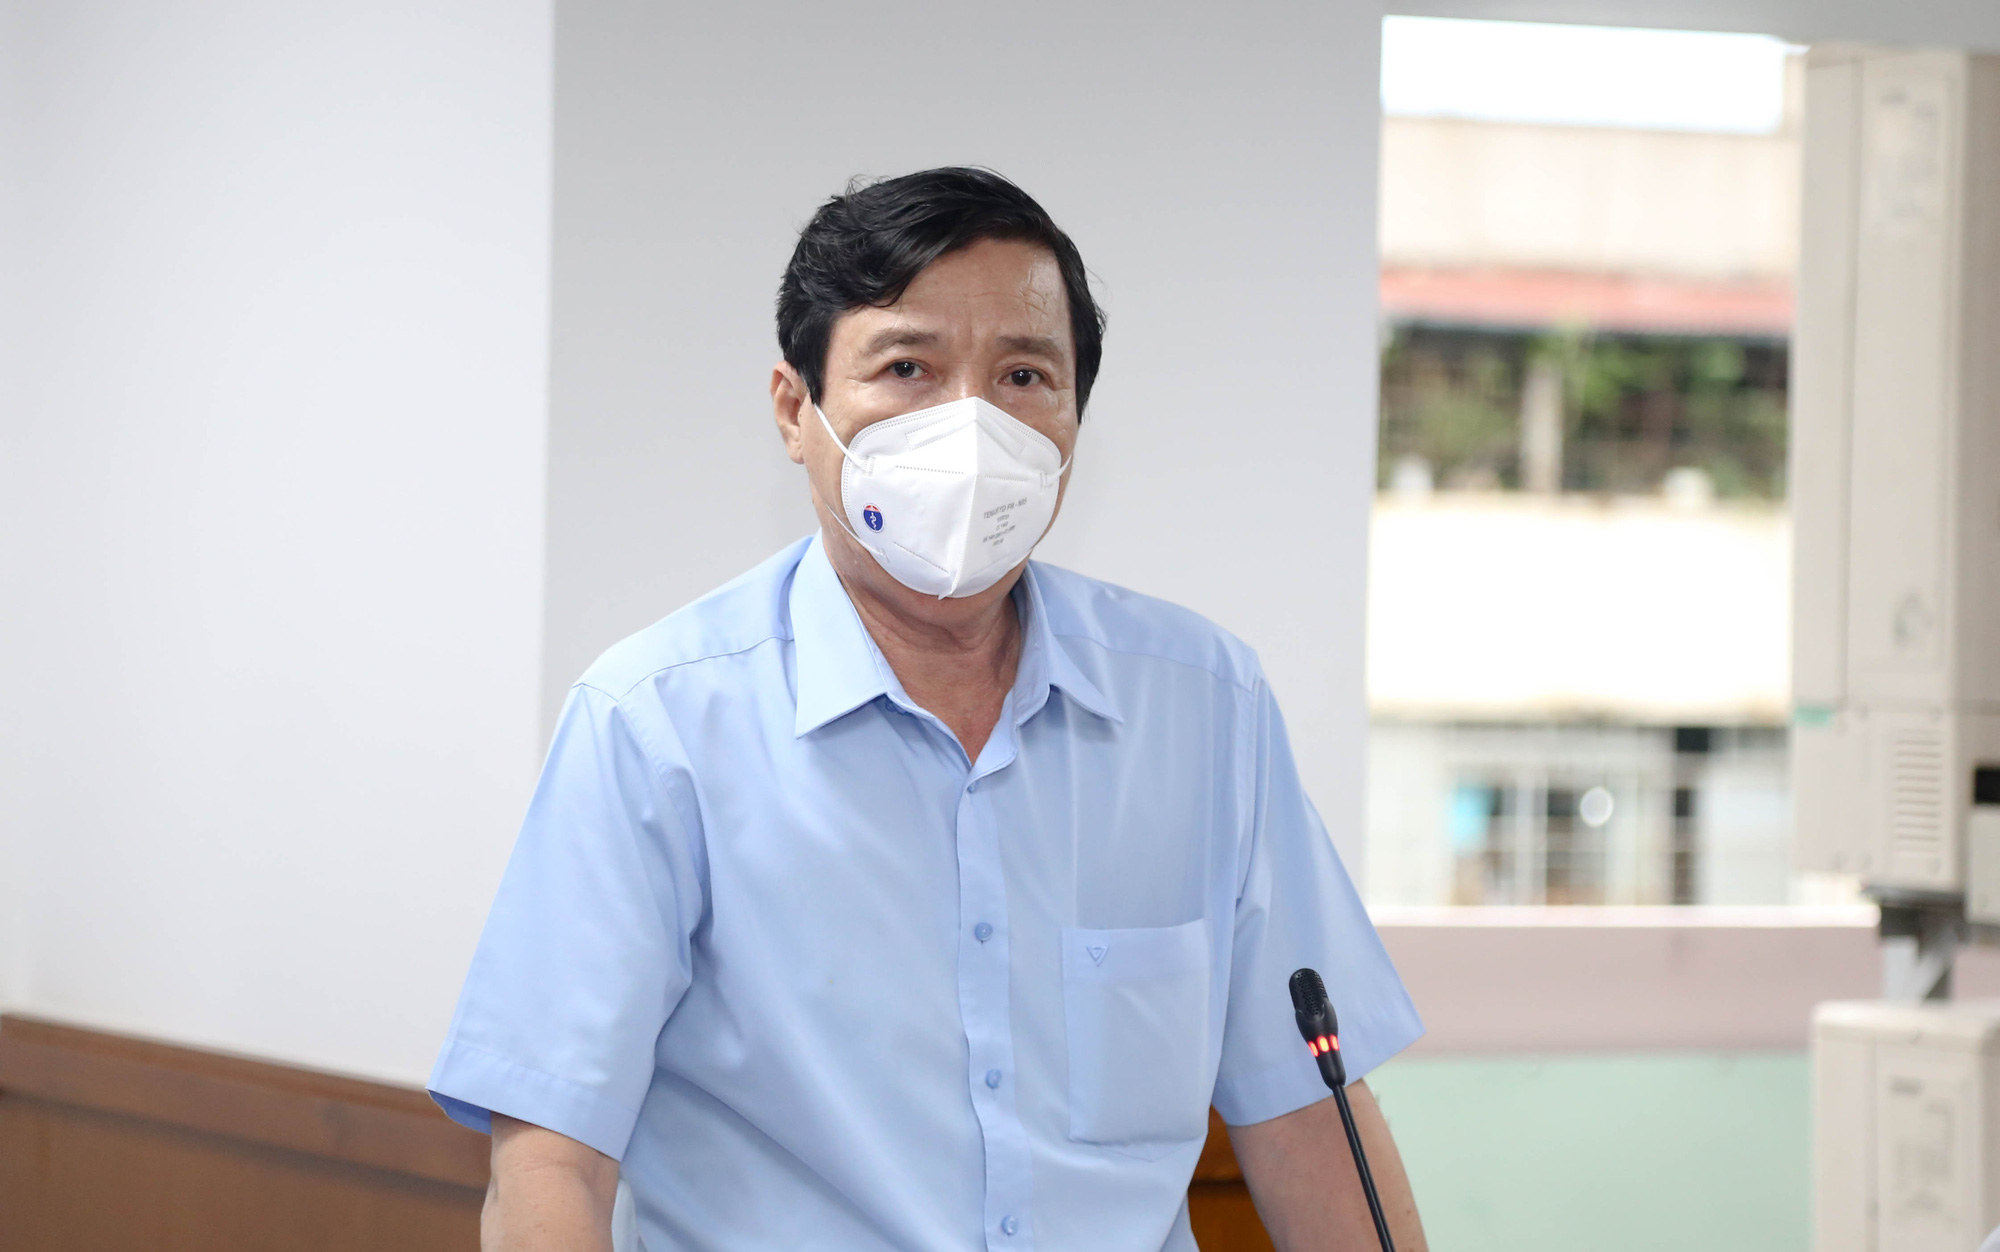 6,000 out of 170,000 samples have positive rapid coronavirus test result in Ho Chi Minh City